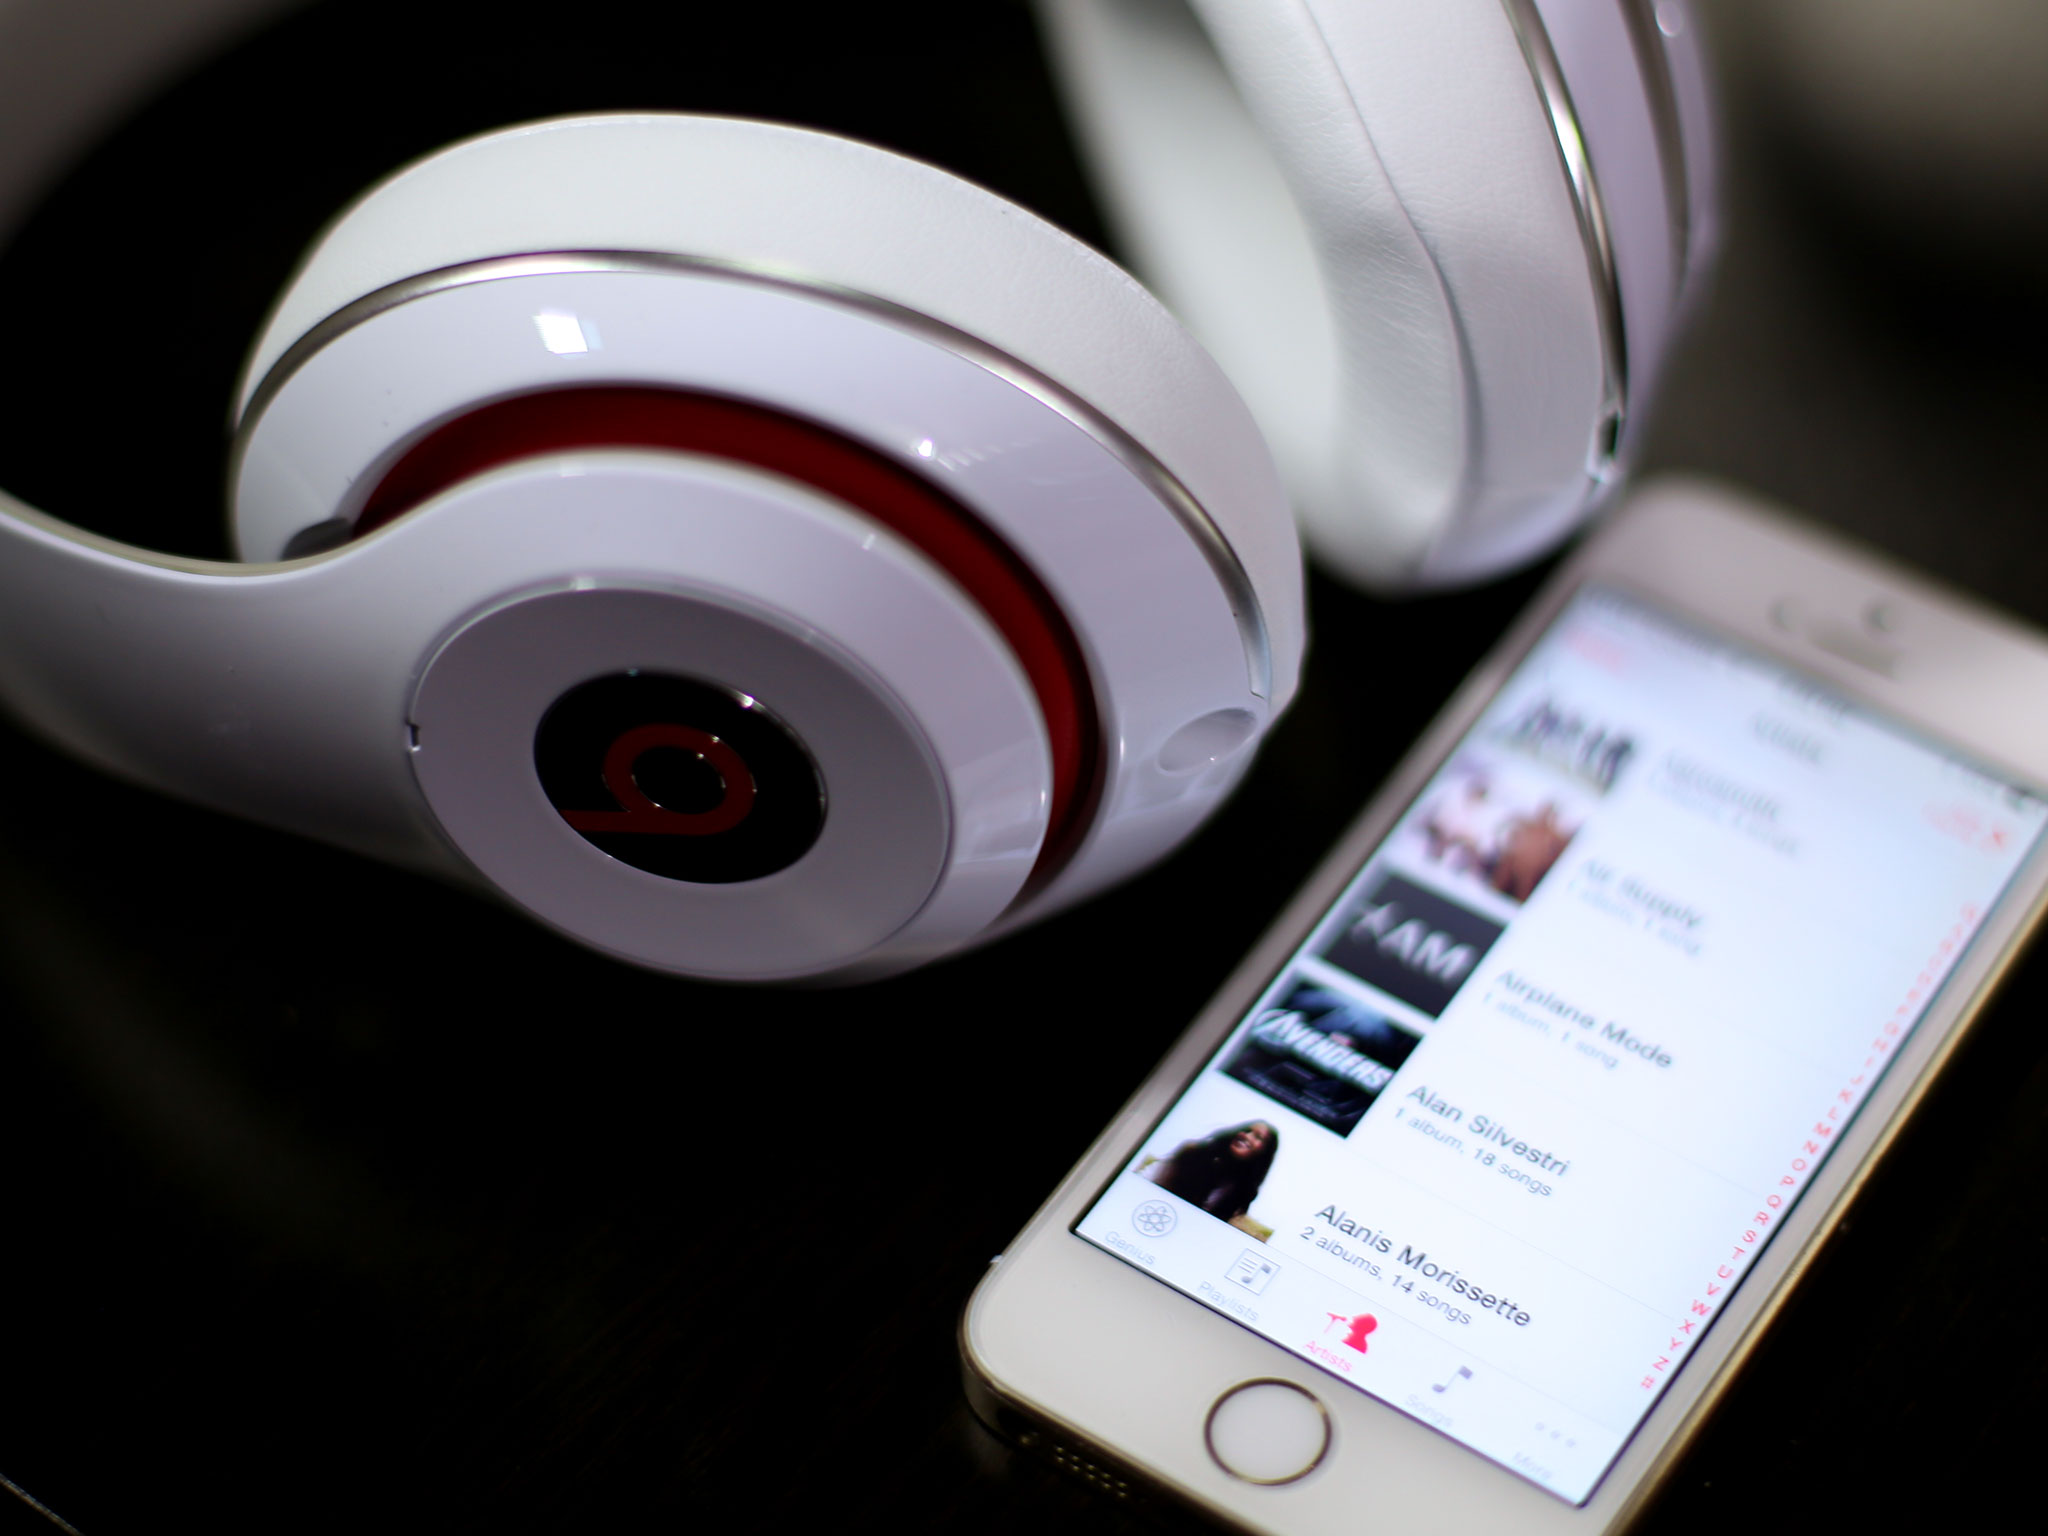 Apple acquires Beats Music and Beats Electronics for $3 billion